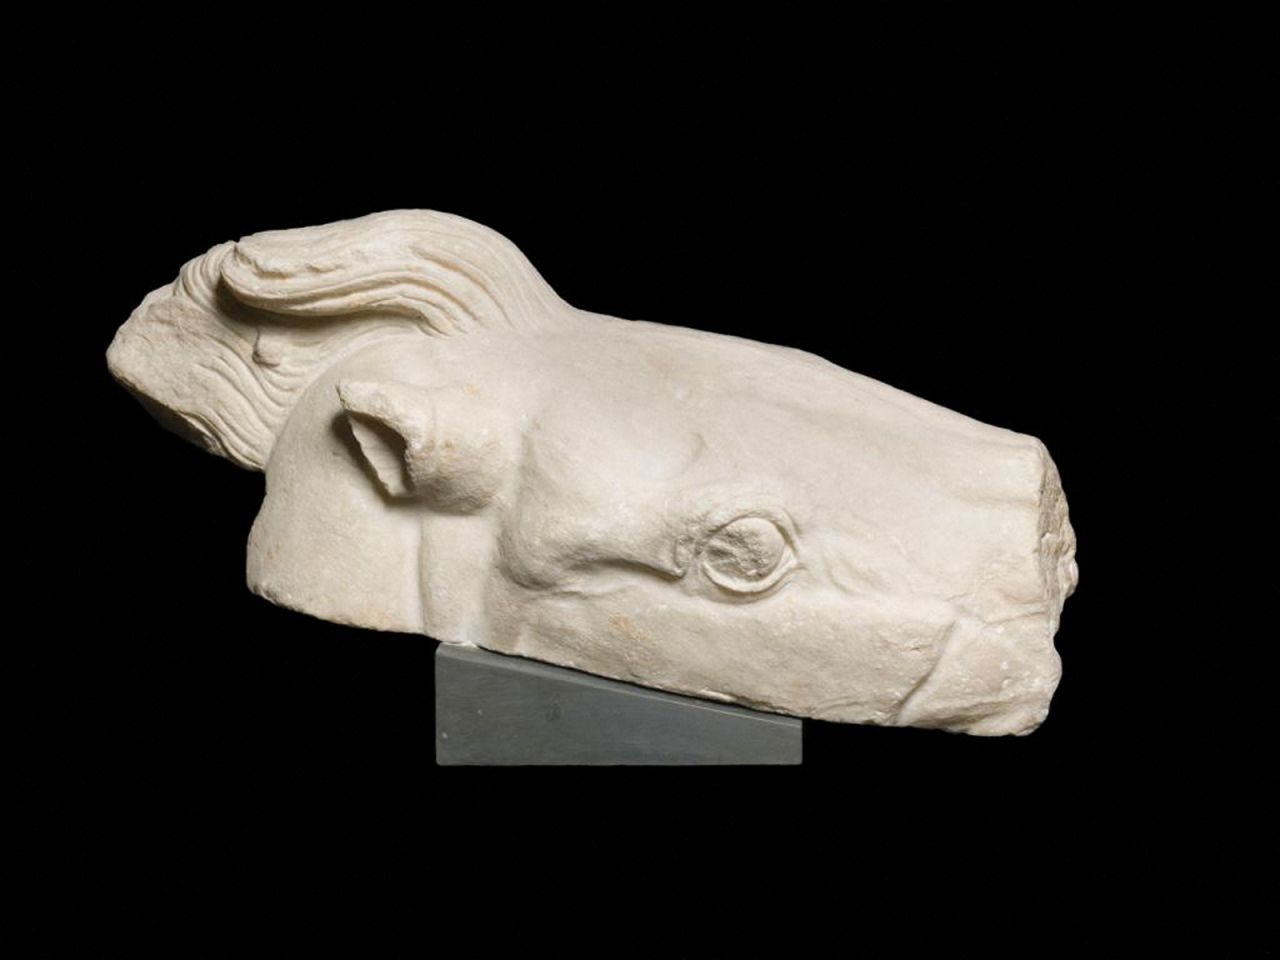 One of pieces depicts the head of the horse that was pulling Athena's chariot.